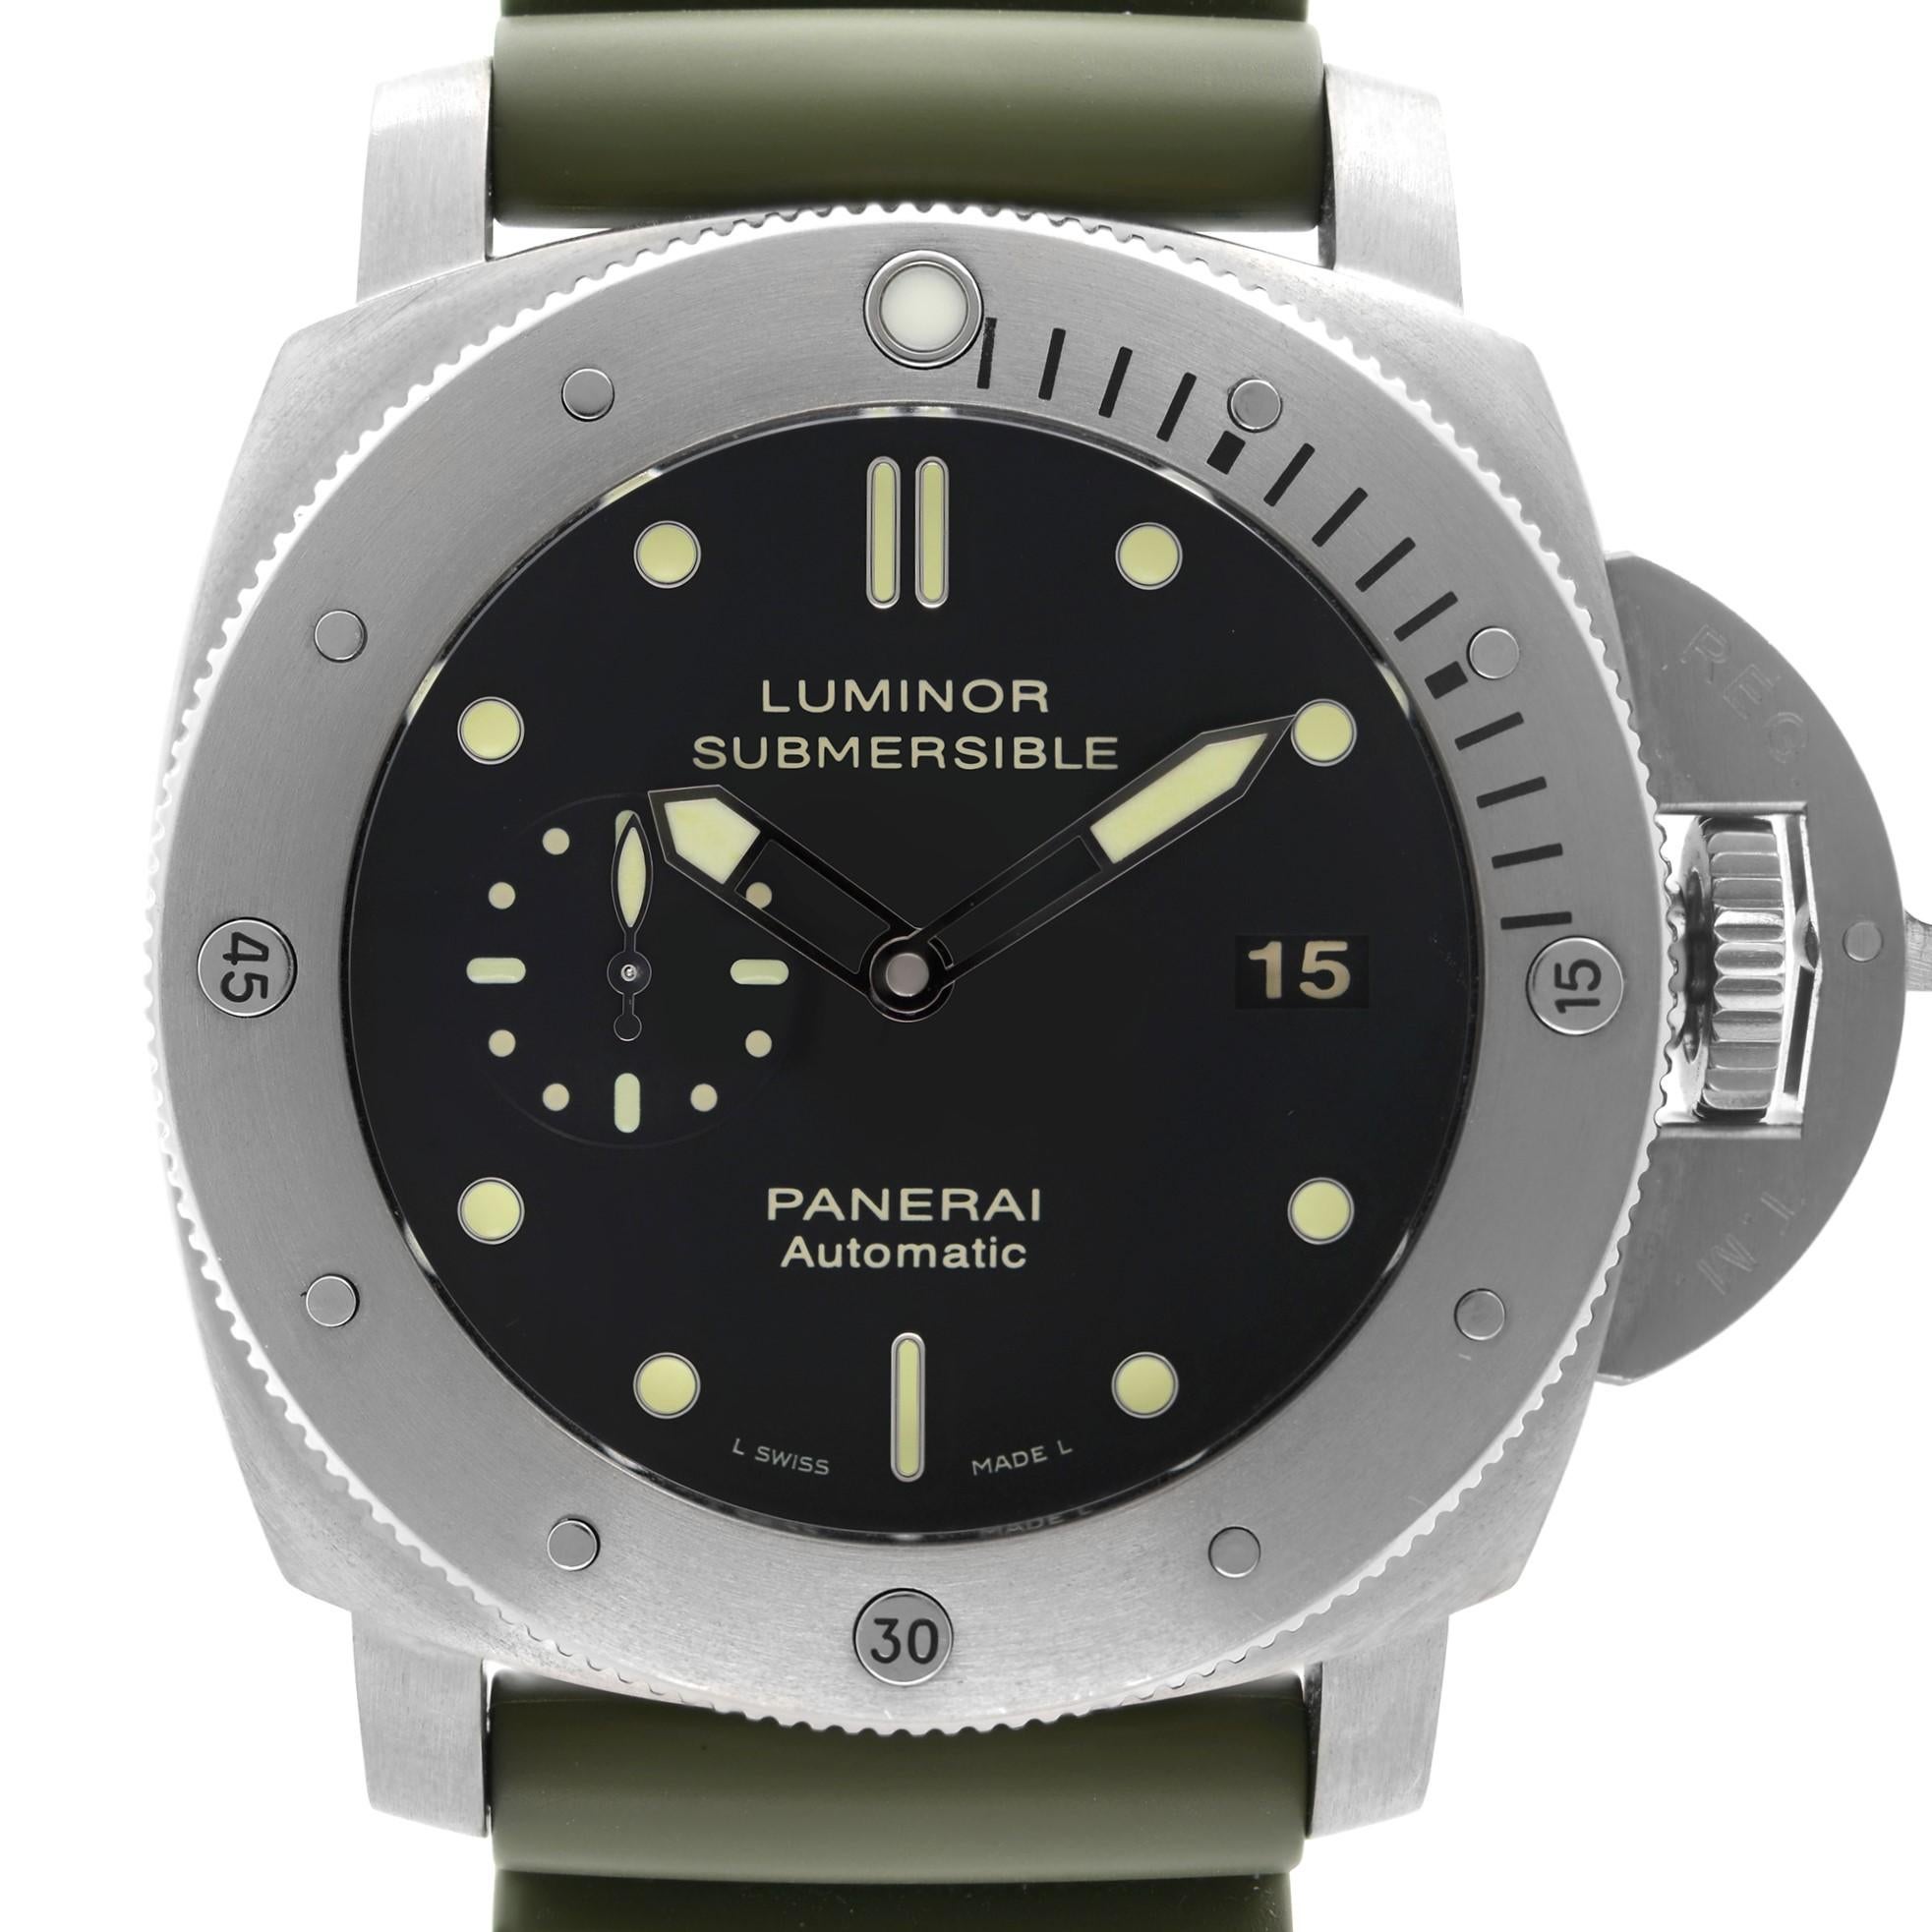 Excellent Pre-owned Condition Panerai Luminor Submersible Titanium Black Dial Automatic Men's Watch PAM00305. Green Band.  No Original Box and Papers are Included. Comes with Chronostore Presentation Box and Authenticity Card. Covered by 1-year